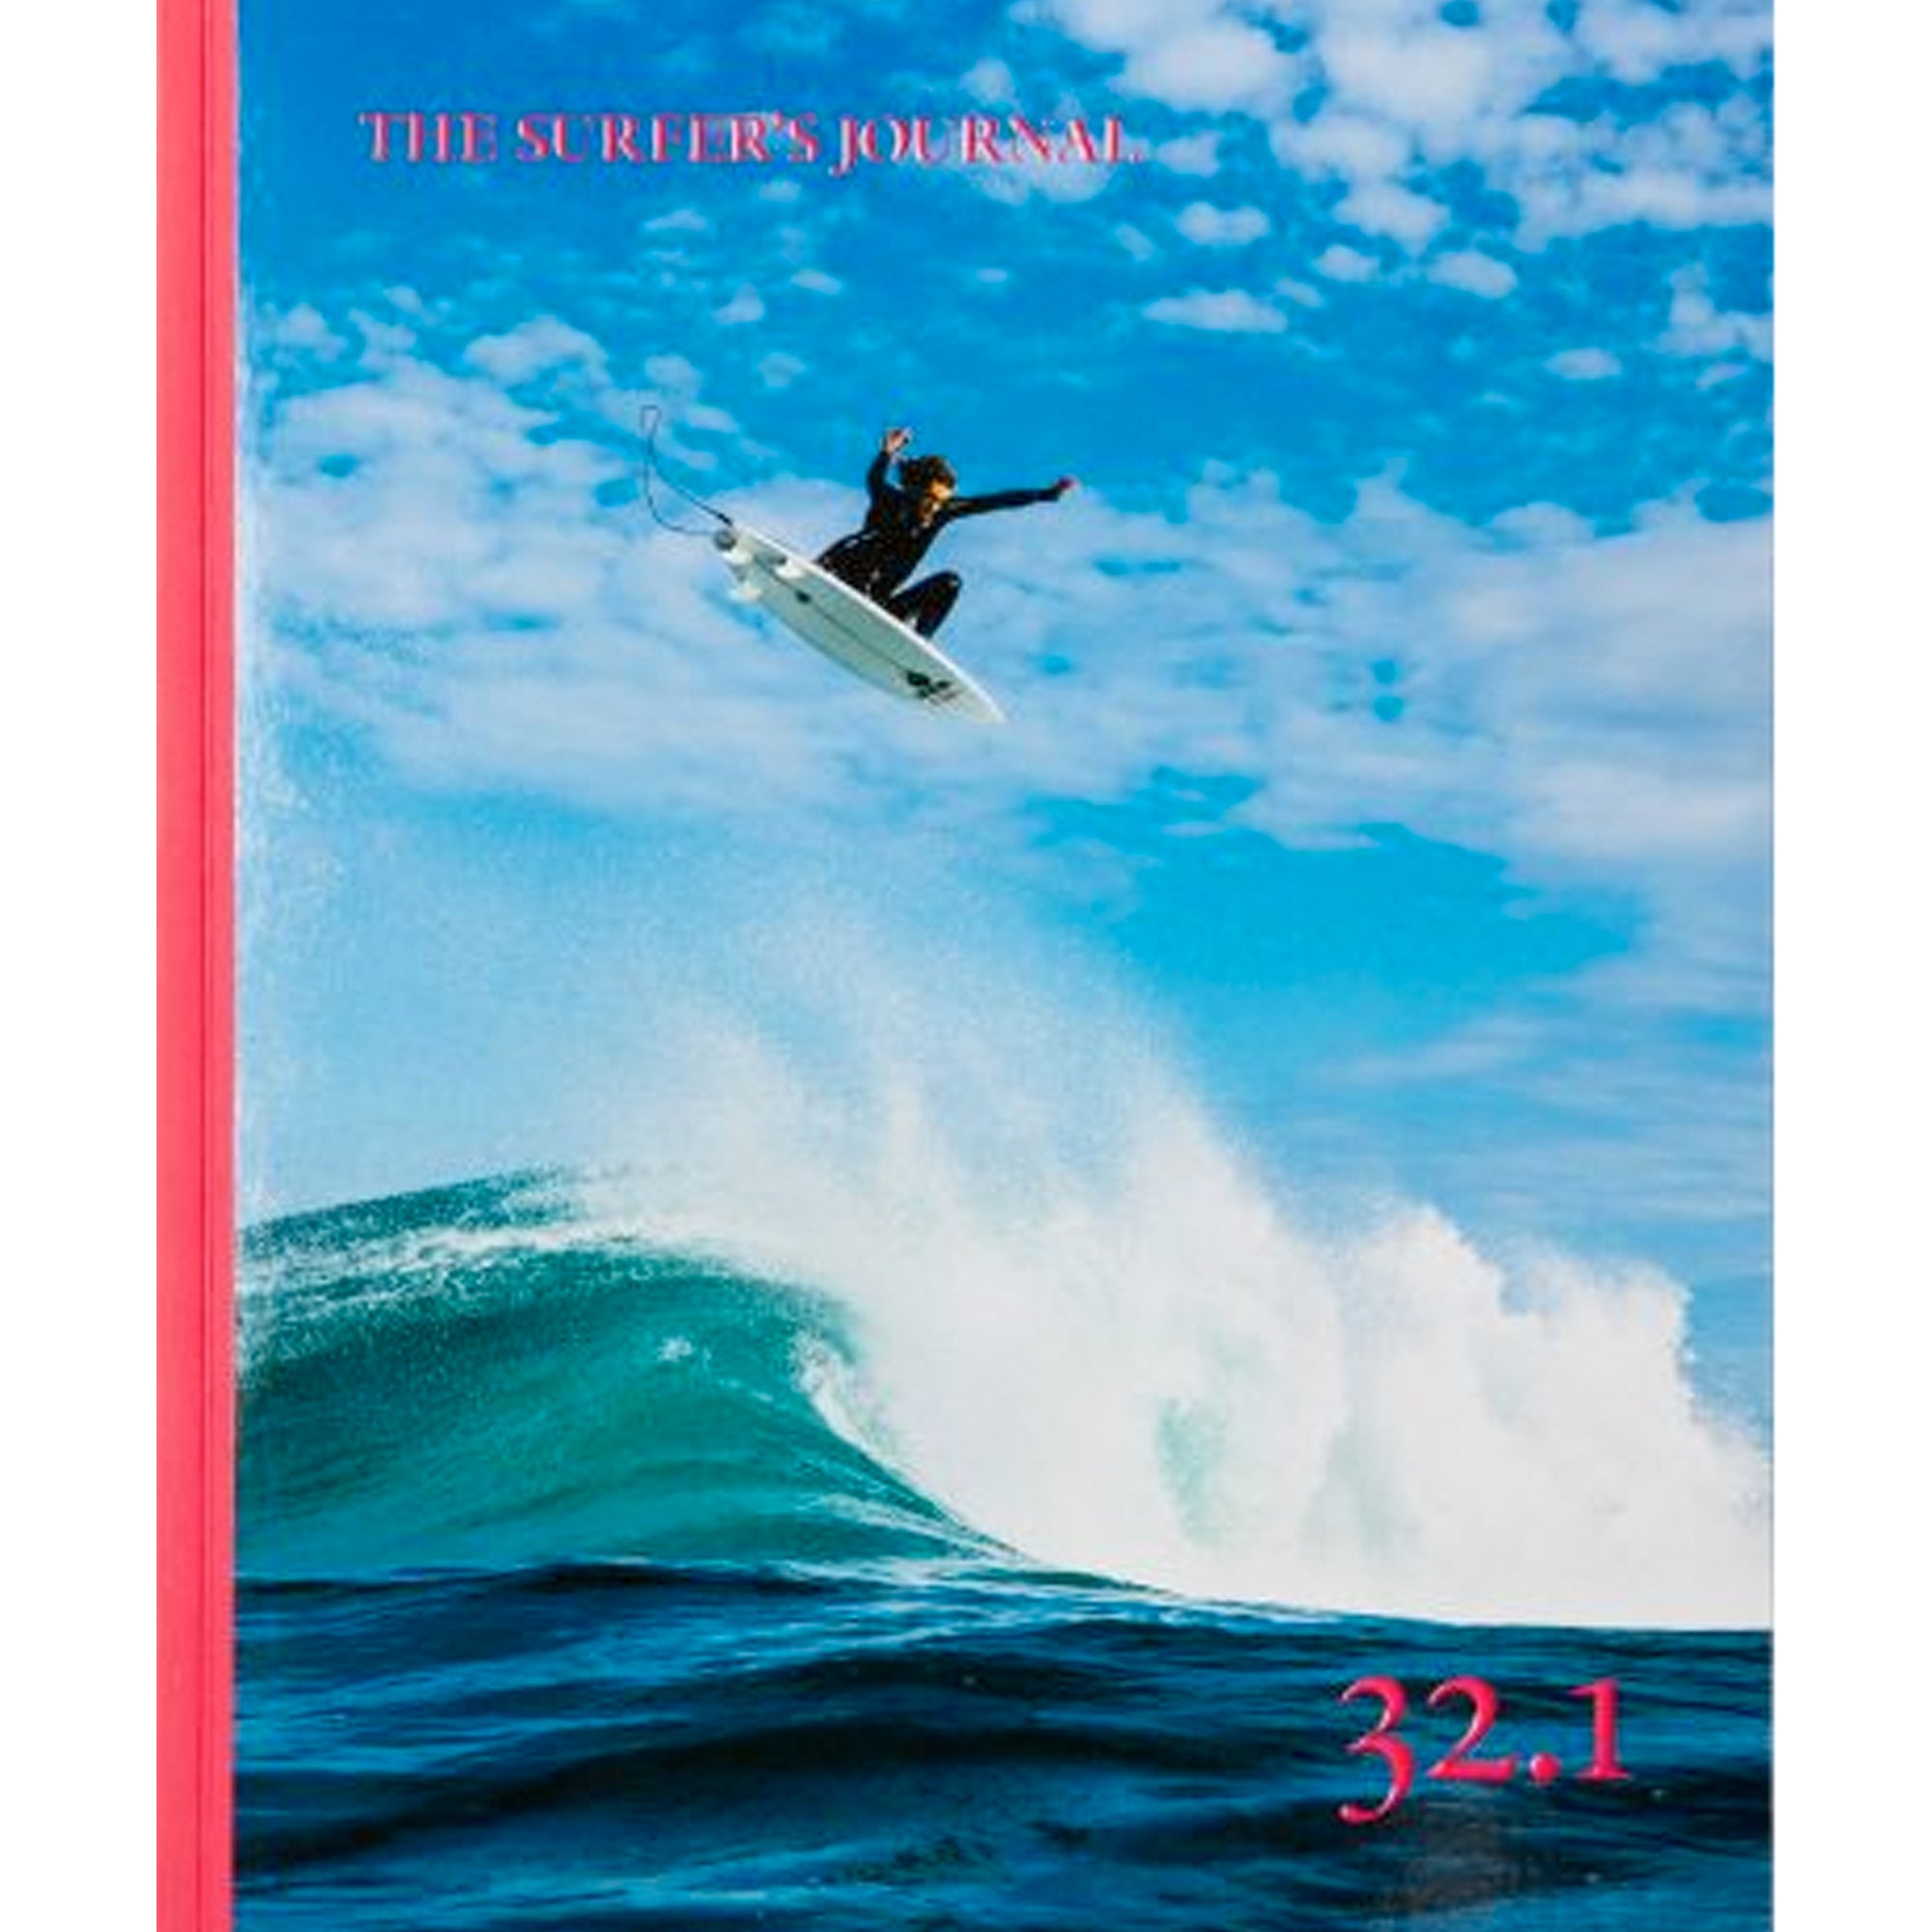 The Surfer Journal #32.1